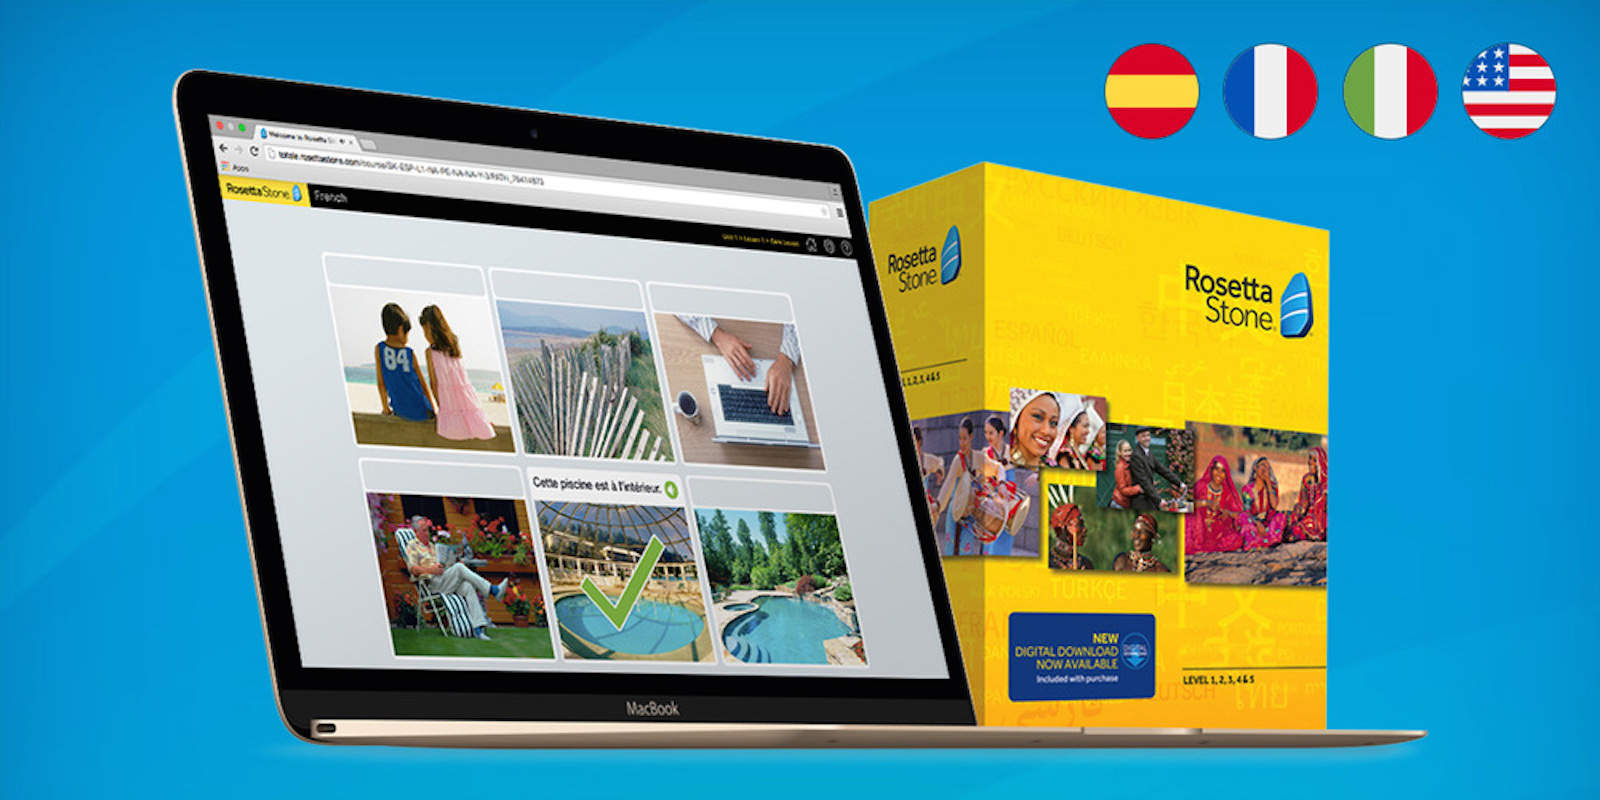 Rosetta Stone set the standard for language learning software, and this box set shows why.